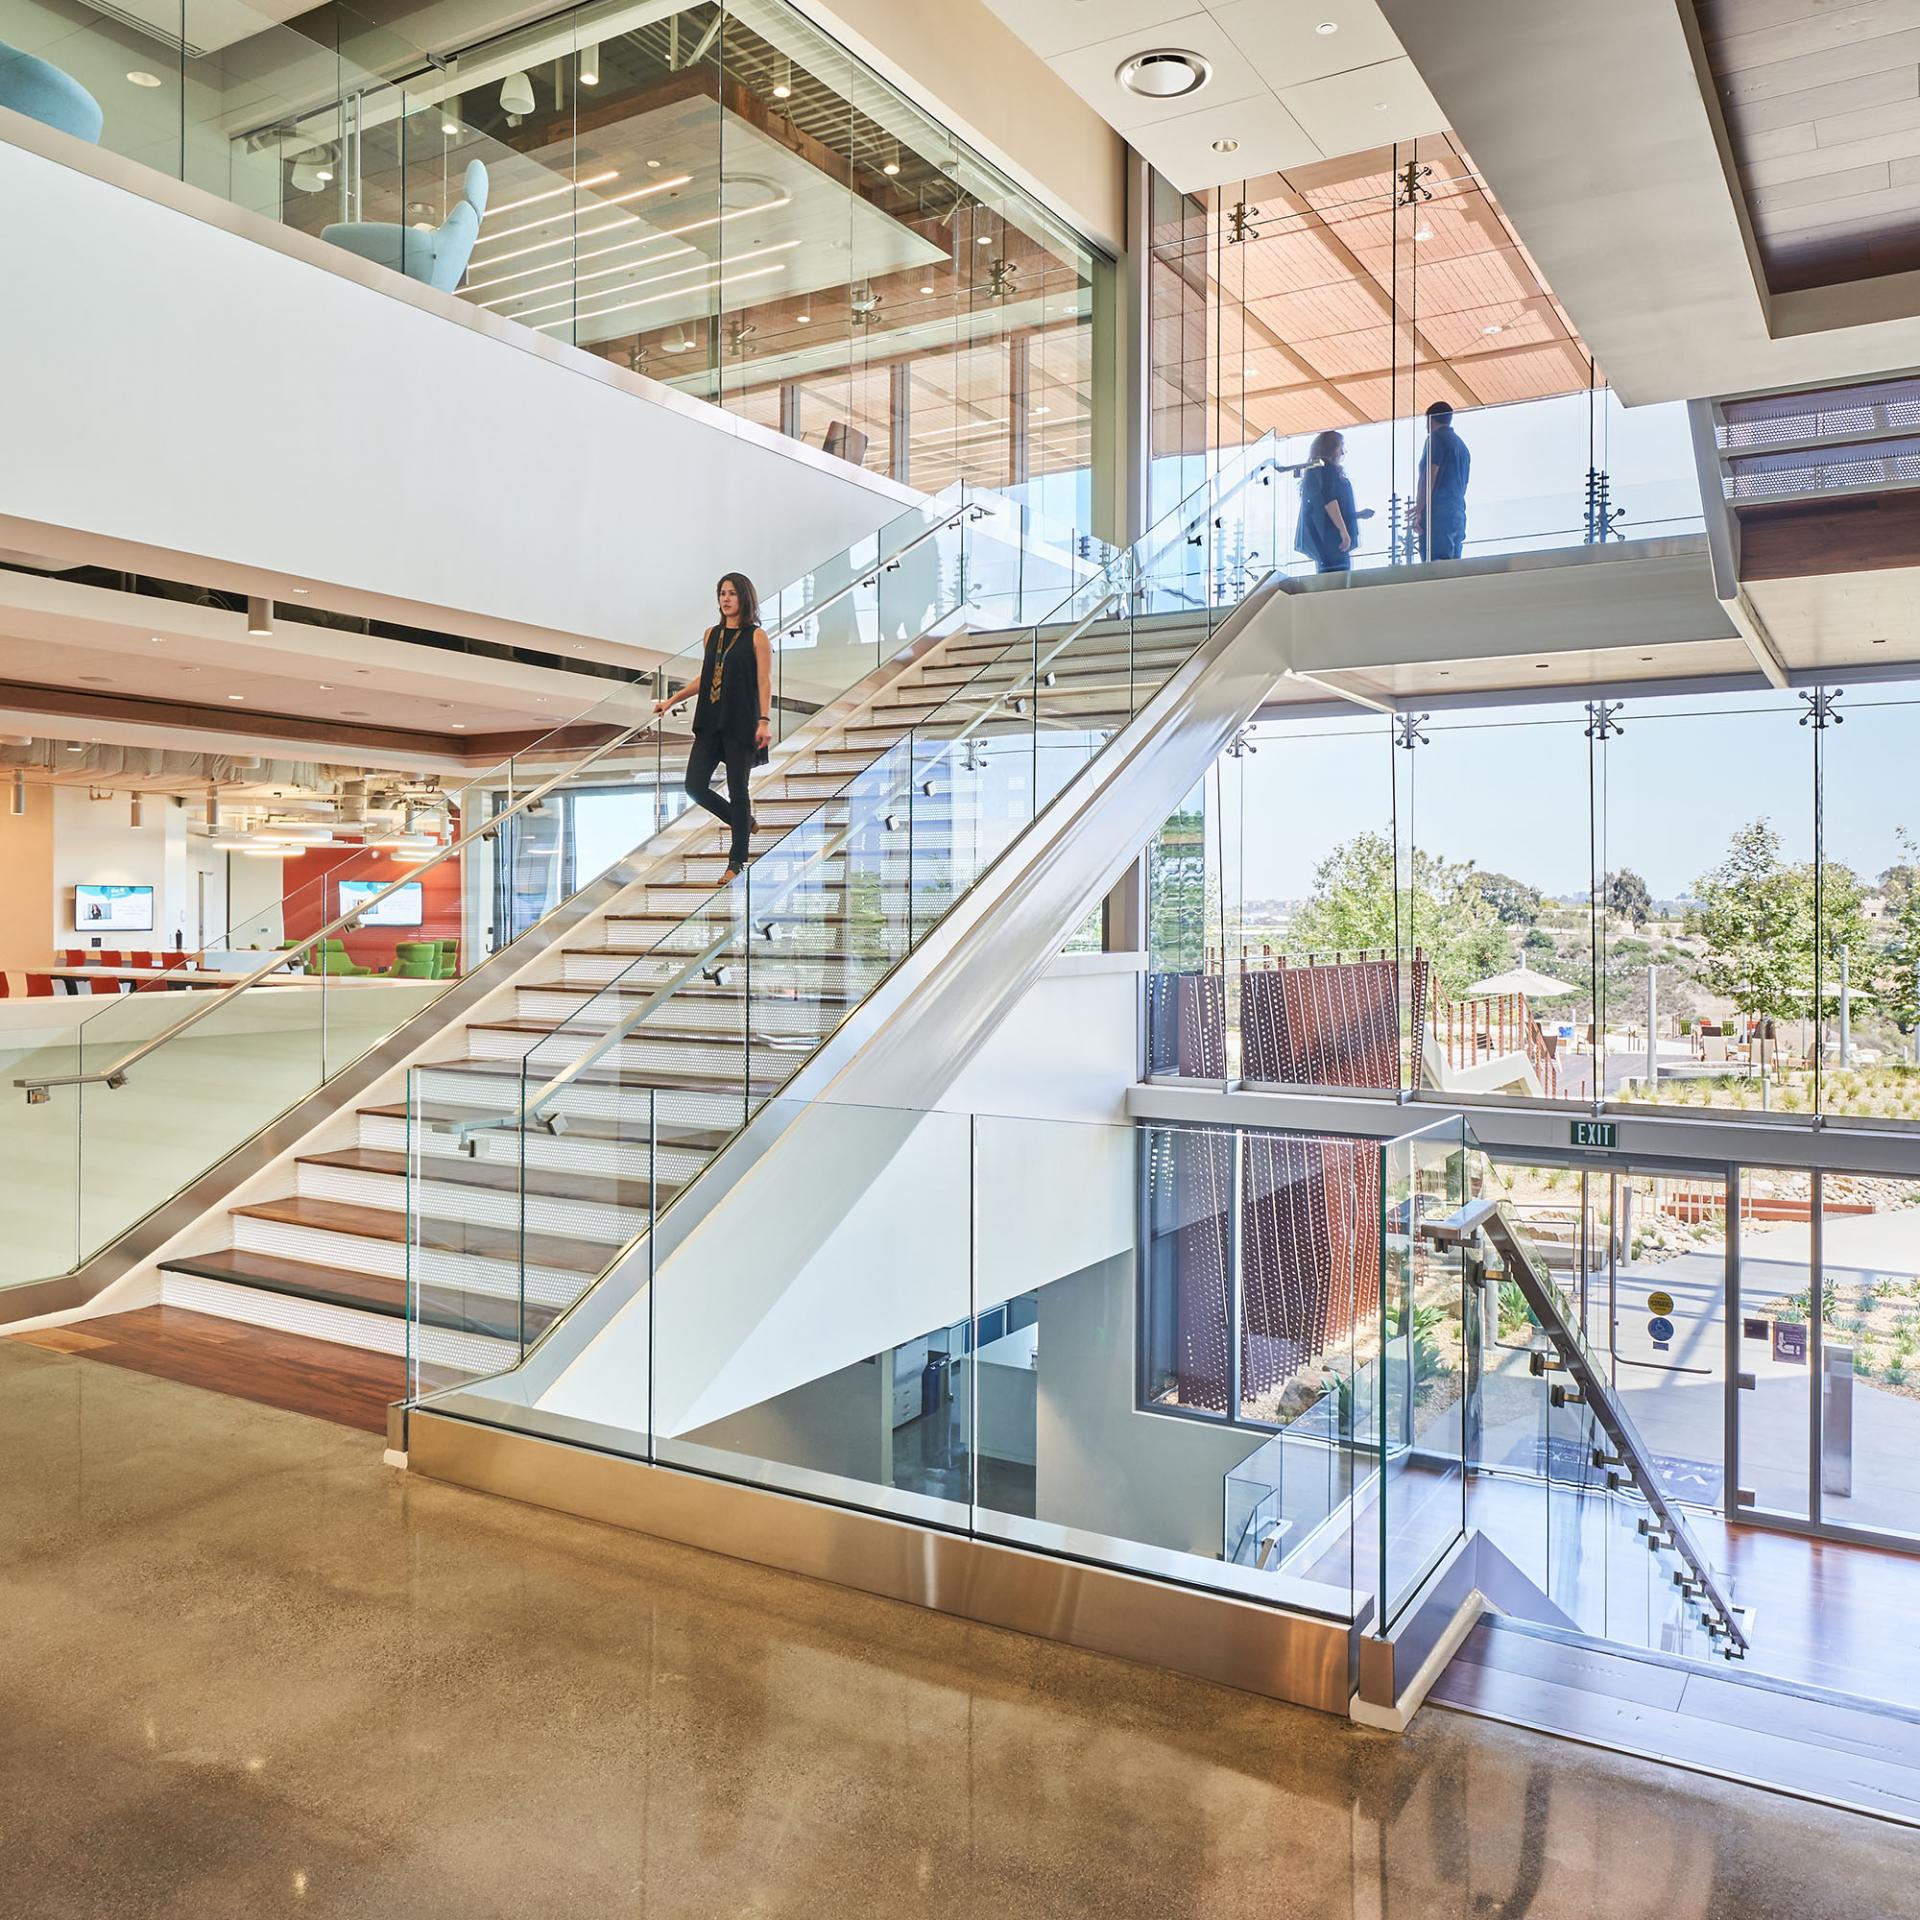 Interior shot of a staircase at the San Diego Vertex Pharmaceuticals research facility